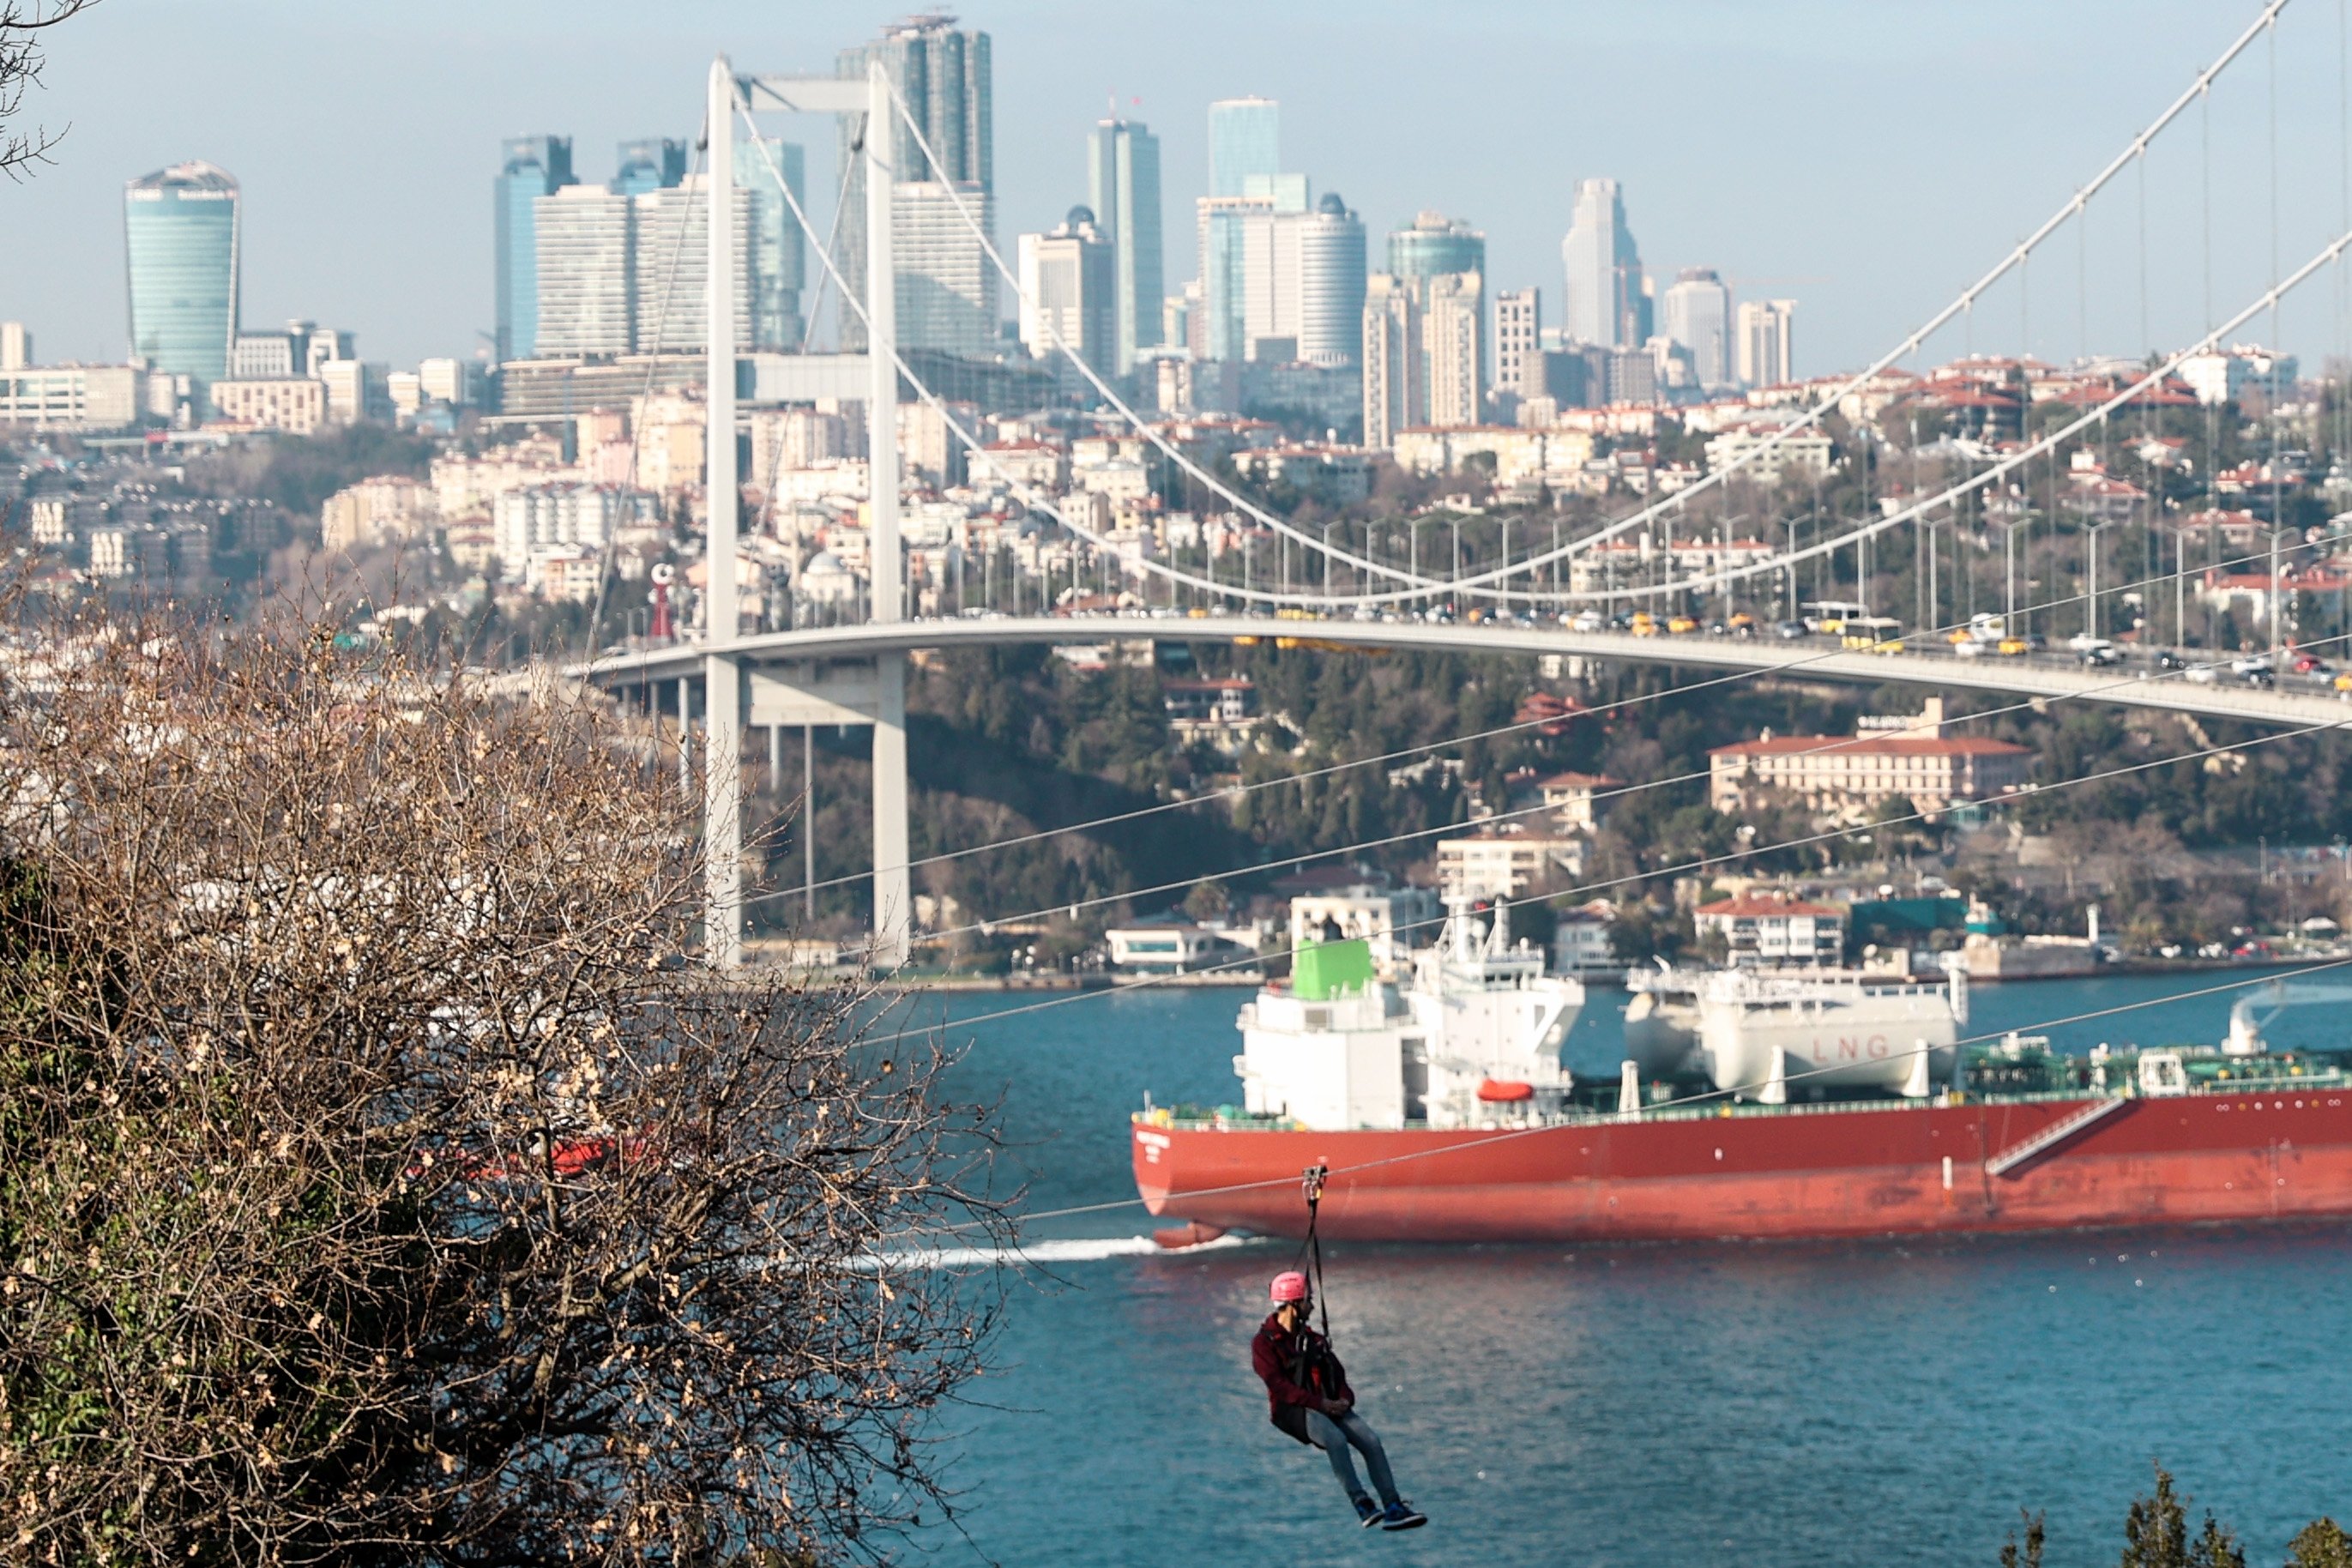 Adventure lovers in Istanbul can now feel their hearts race while ziplining and taking in a dazzling view of the Bosporus at the same time. (AA Photo)